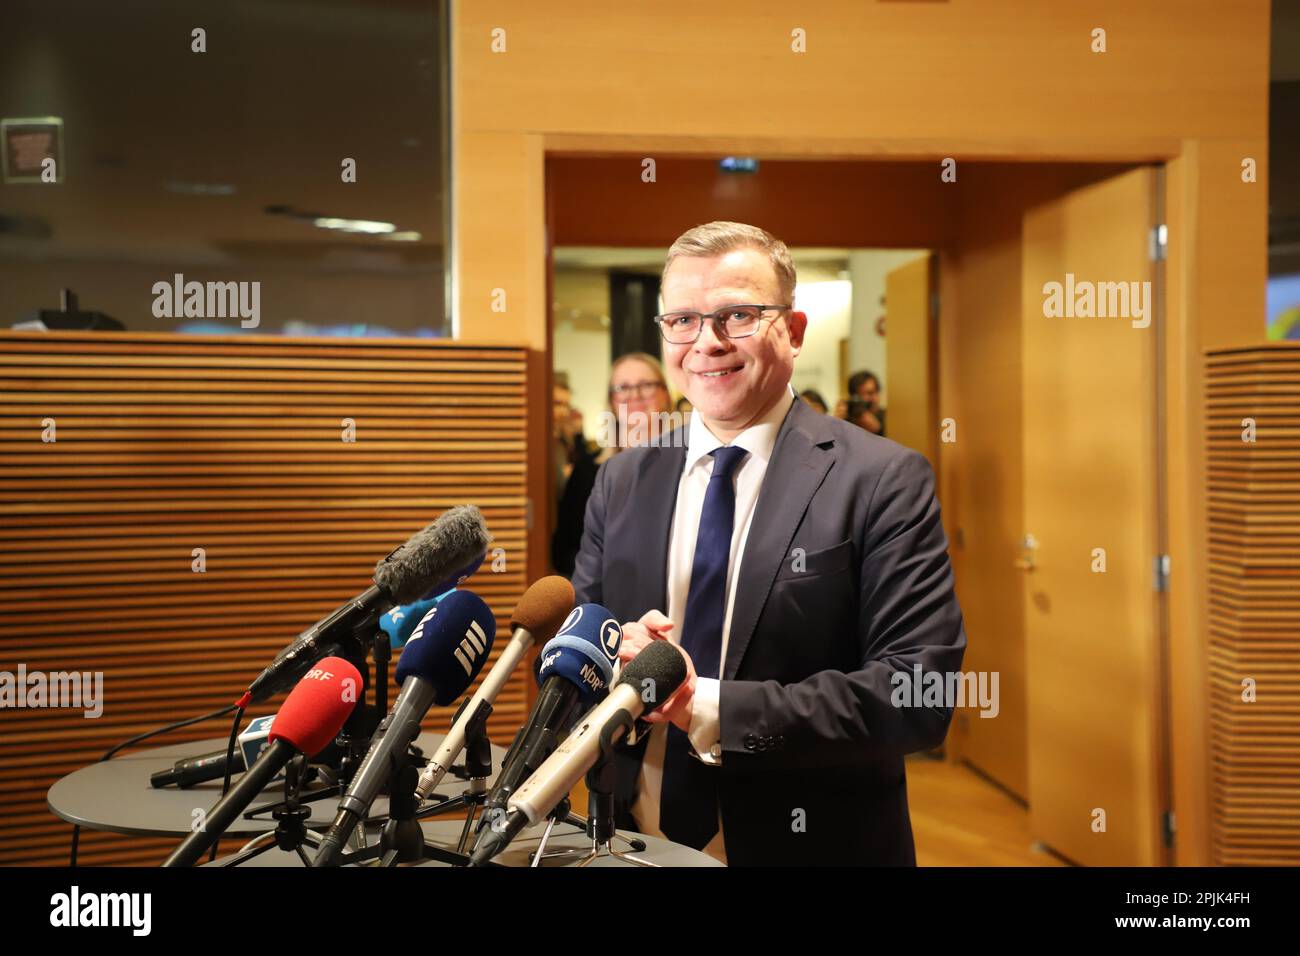 Helsinki, Finland. 2nd Apr, 2023. Finland's National Coalition Party leader Petteri Orpo attends a press conference in Helsinki, Finland, April 2, 2023. Finland's opposition National Coalition Party emerged as the largest party in the parliamentary election held on Sunday, according to the preliminary result reported by Finnish national broadcaster Yle. Credit: Chen Jing/Xinhua/Alamy Live News Stock Photo